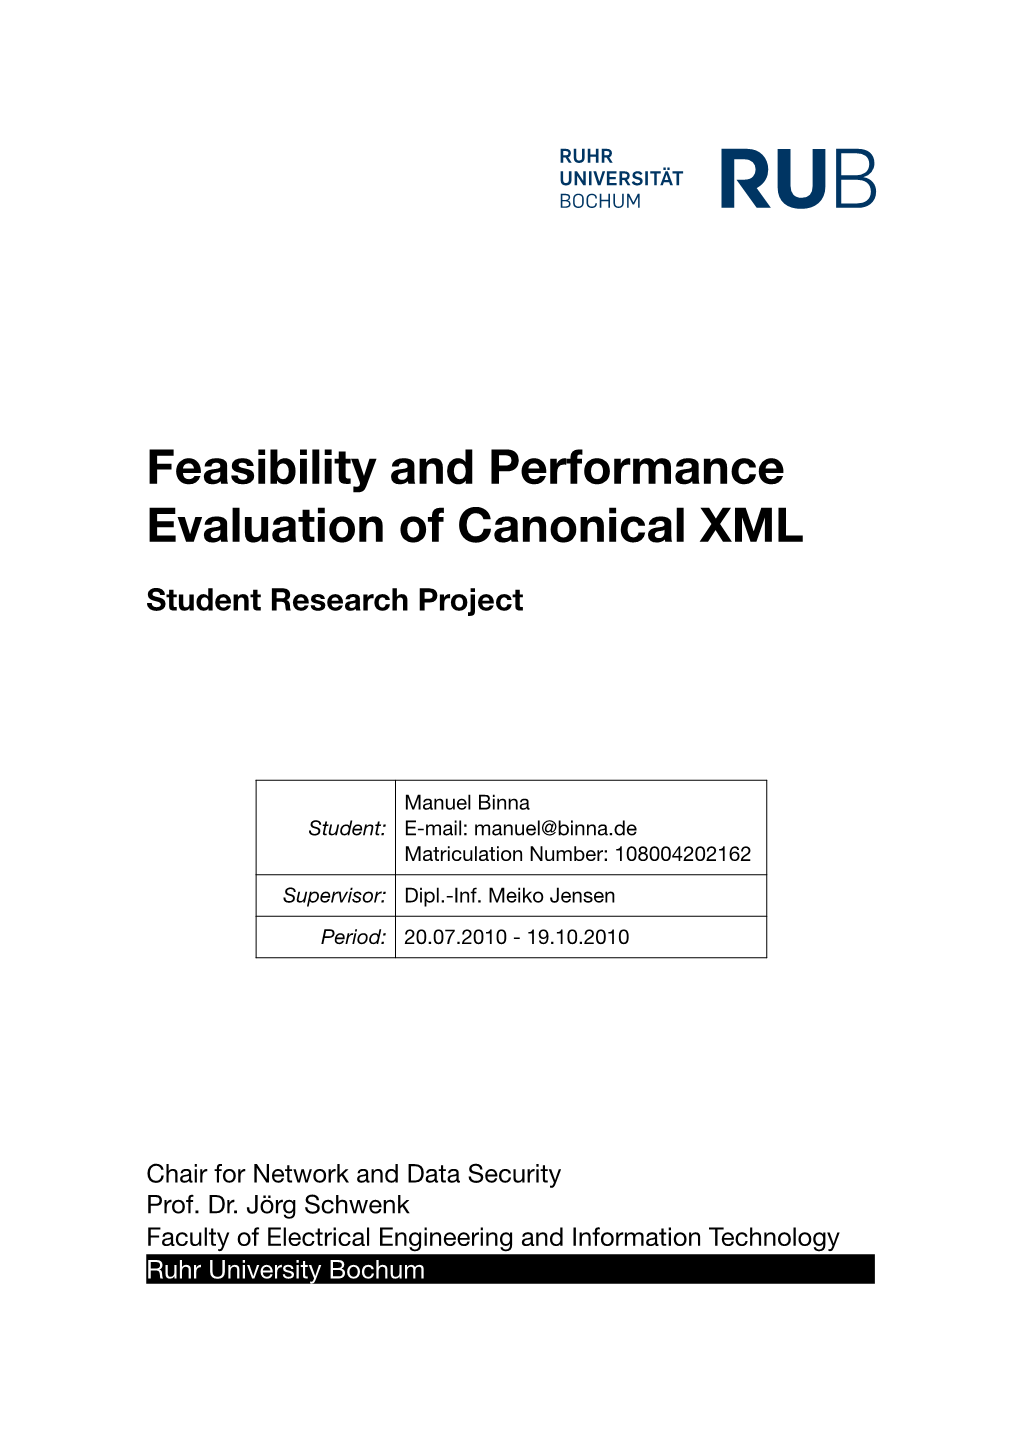 Feasibility and Performance Evaluation of Canonical XML